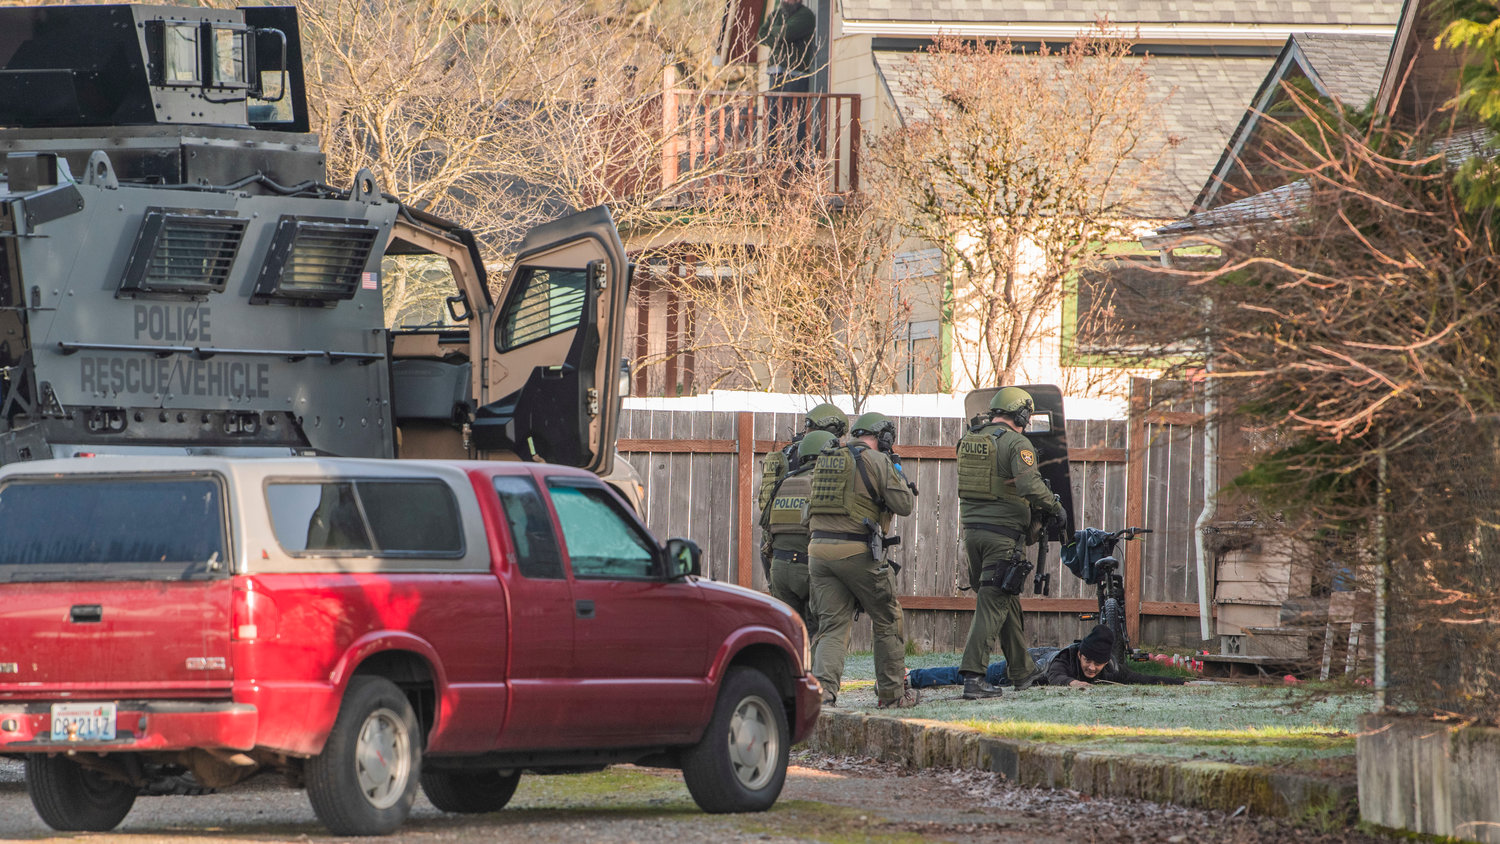 Law enforcement works to detain Elias A. Galaviz, 26, in the 1300 block of Windsor Avenue in Centralia on Thursday.